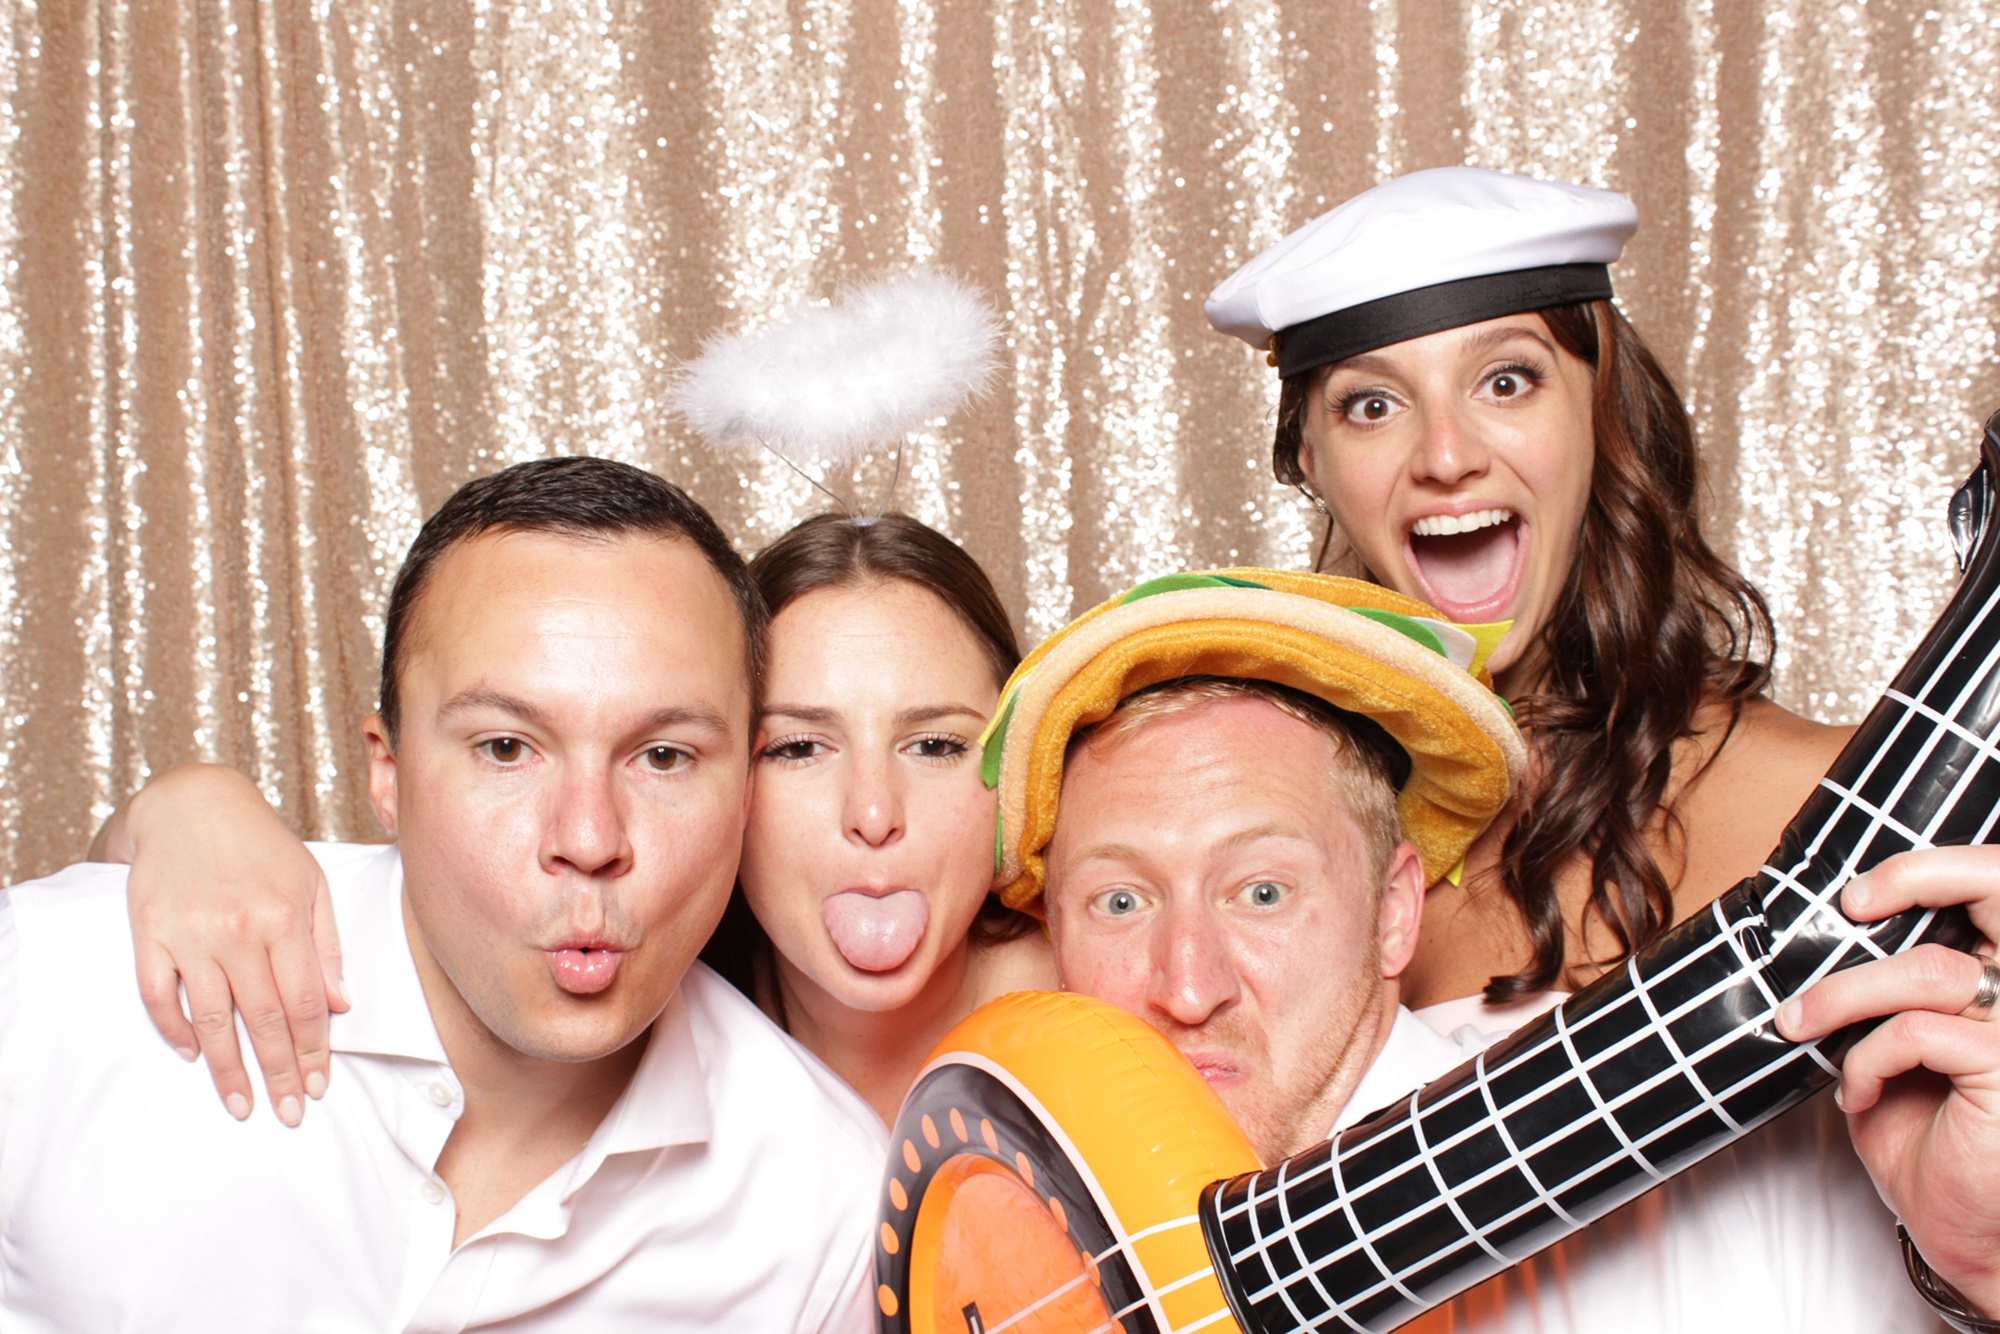 guests play with inflatable banjo during Sandy Hook Chapel Photo Booth